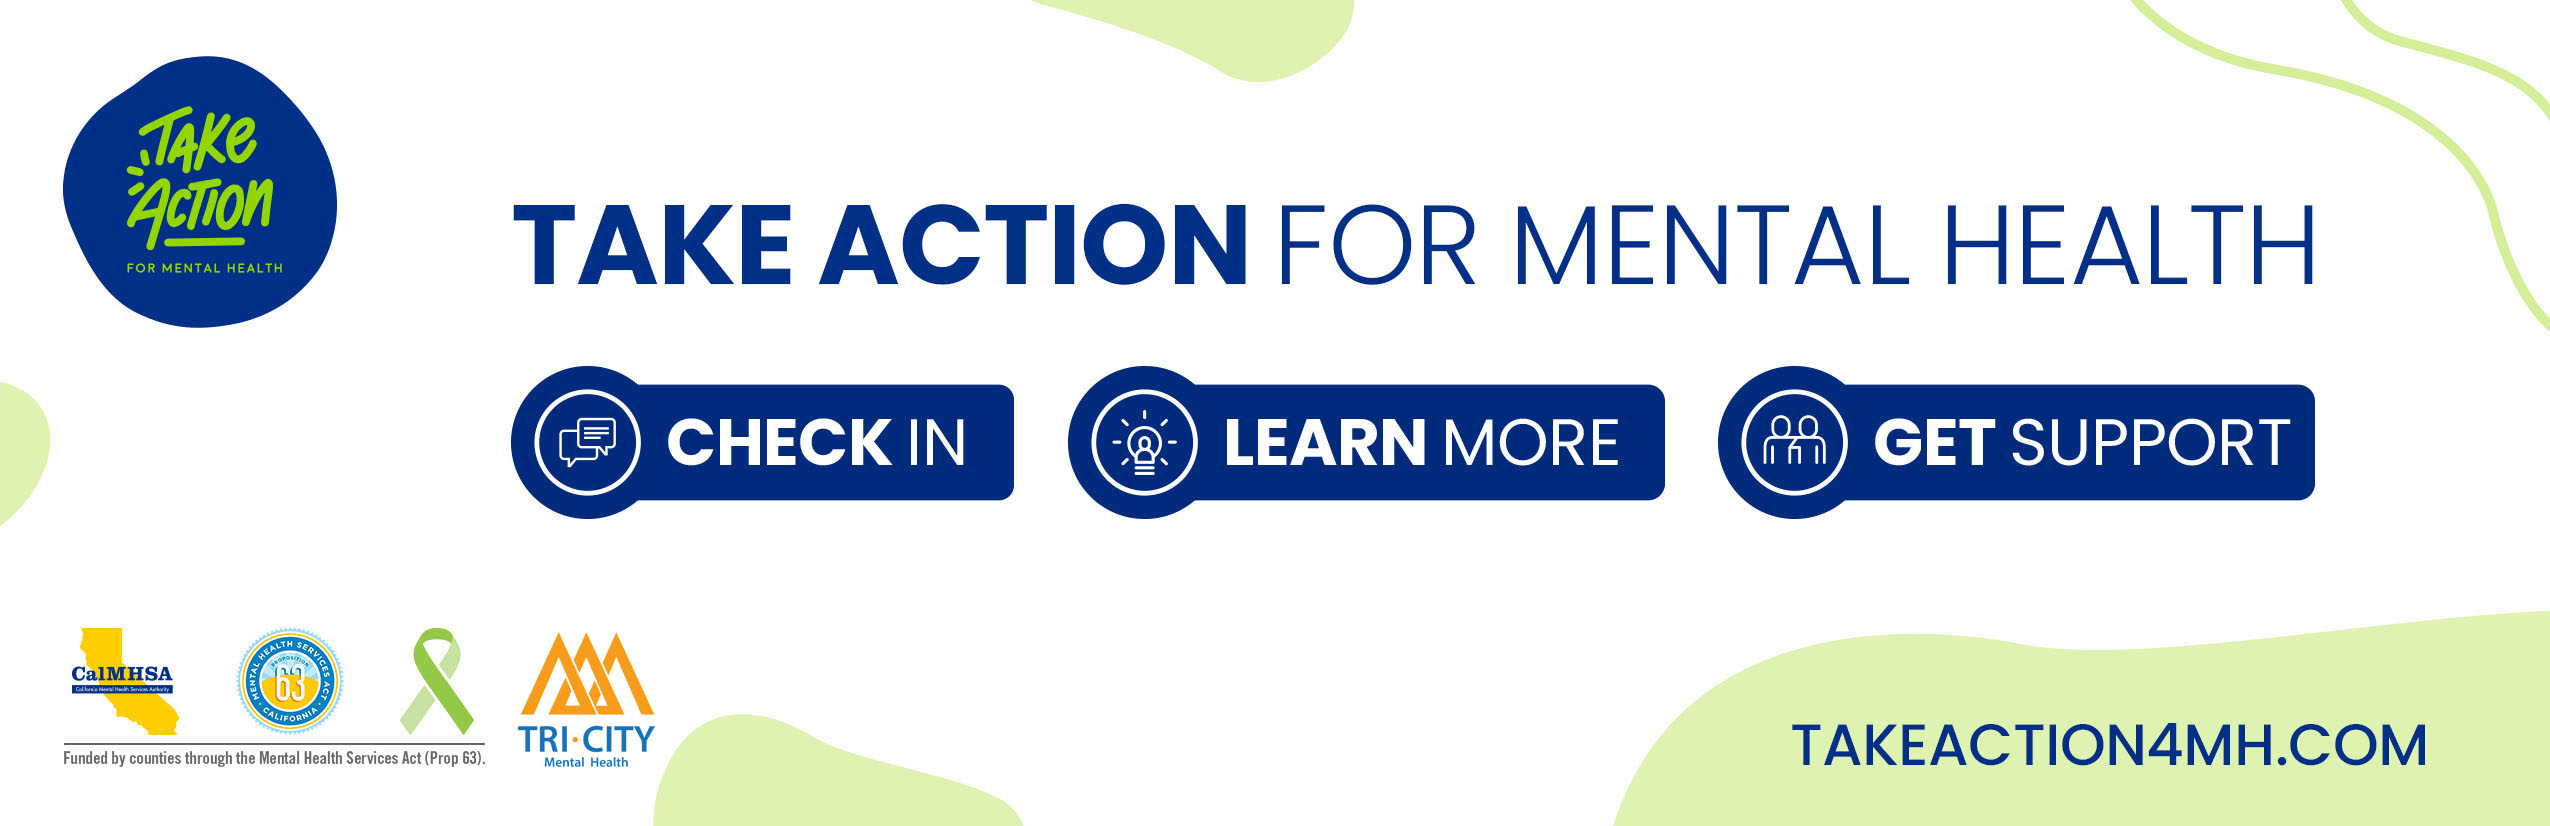 Take Action for Mental Health. Check In, Learn More and Get Support. Funded by Counties through the Mental Health Services Act (Prop 63)